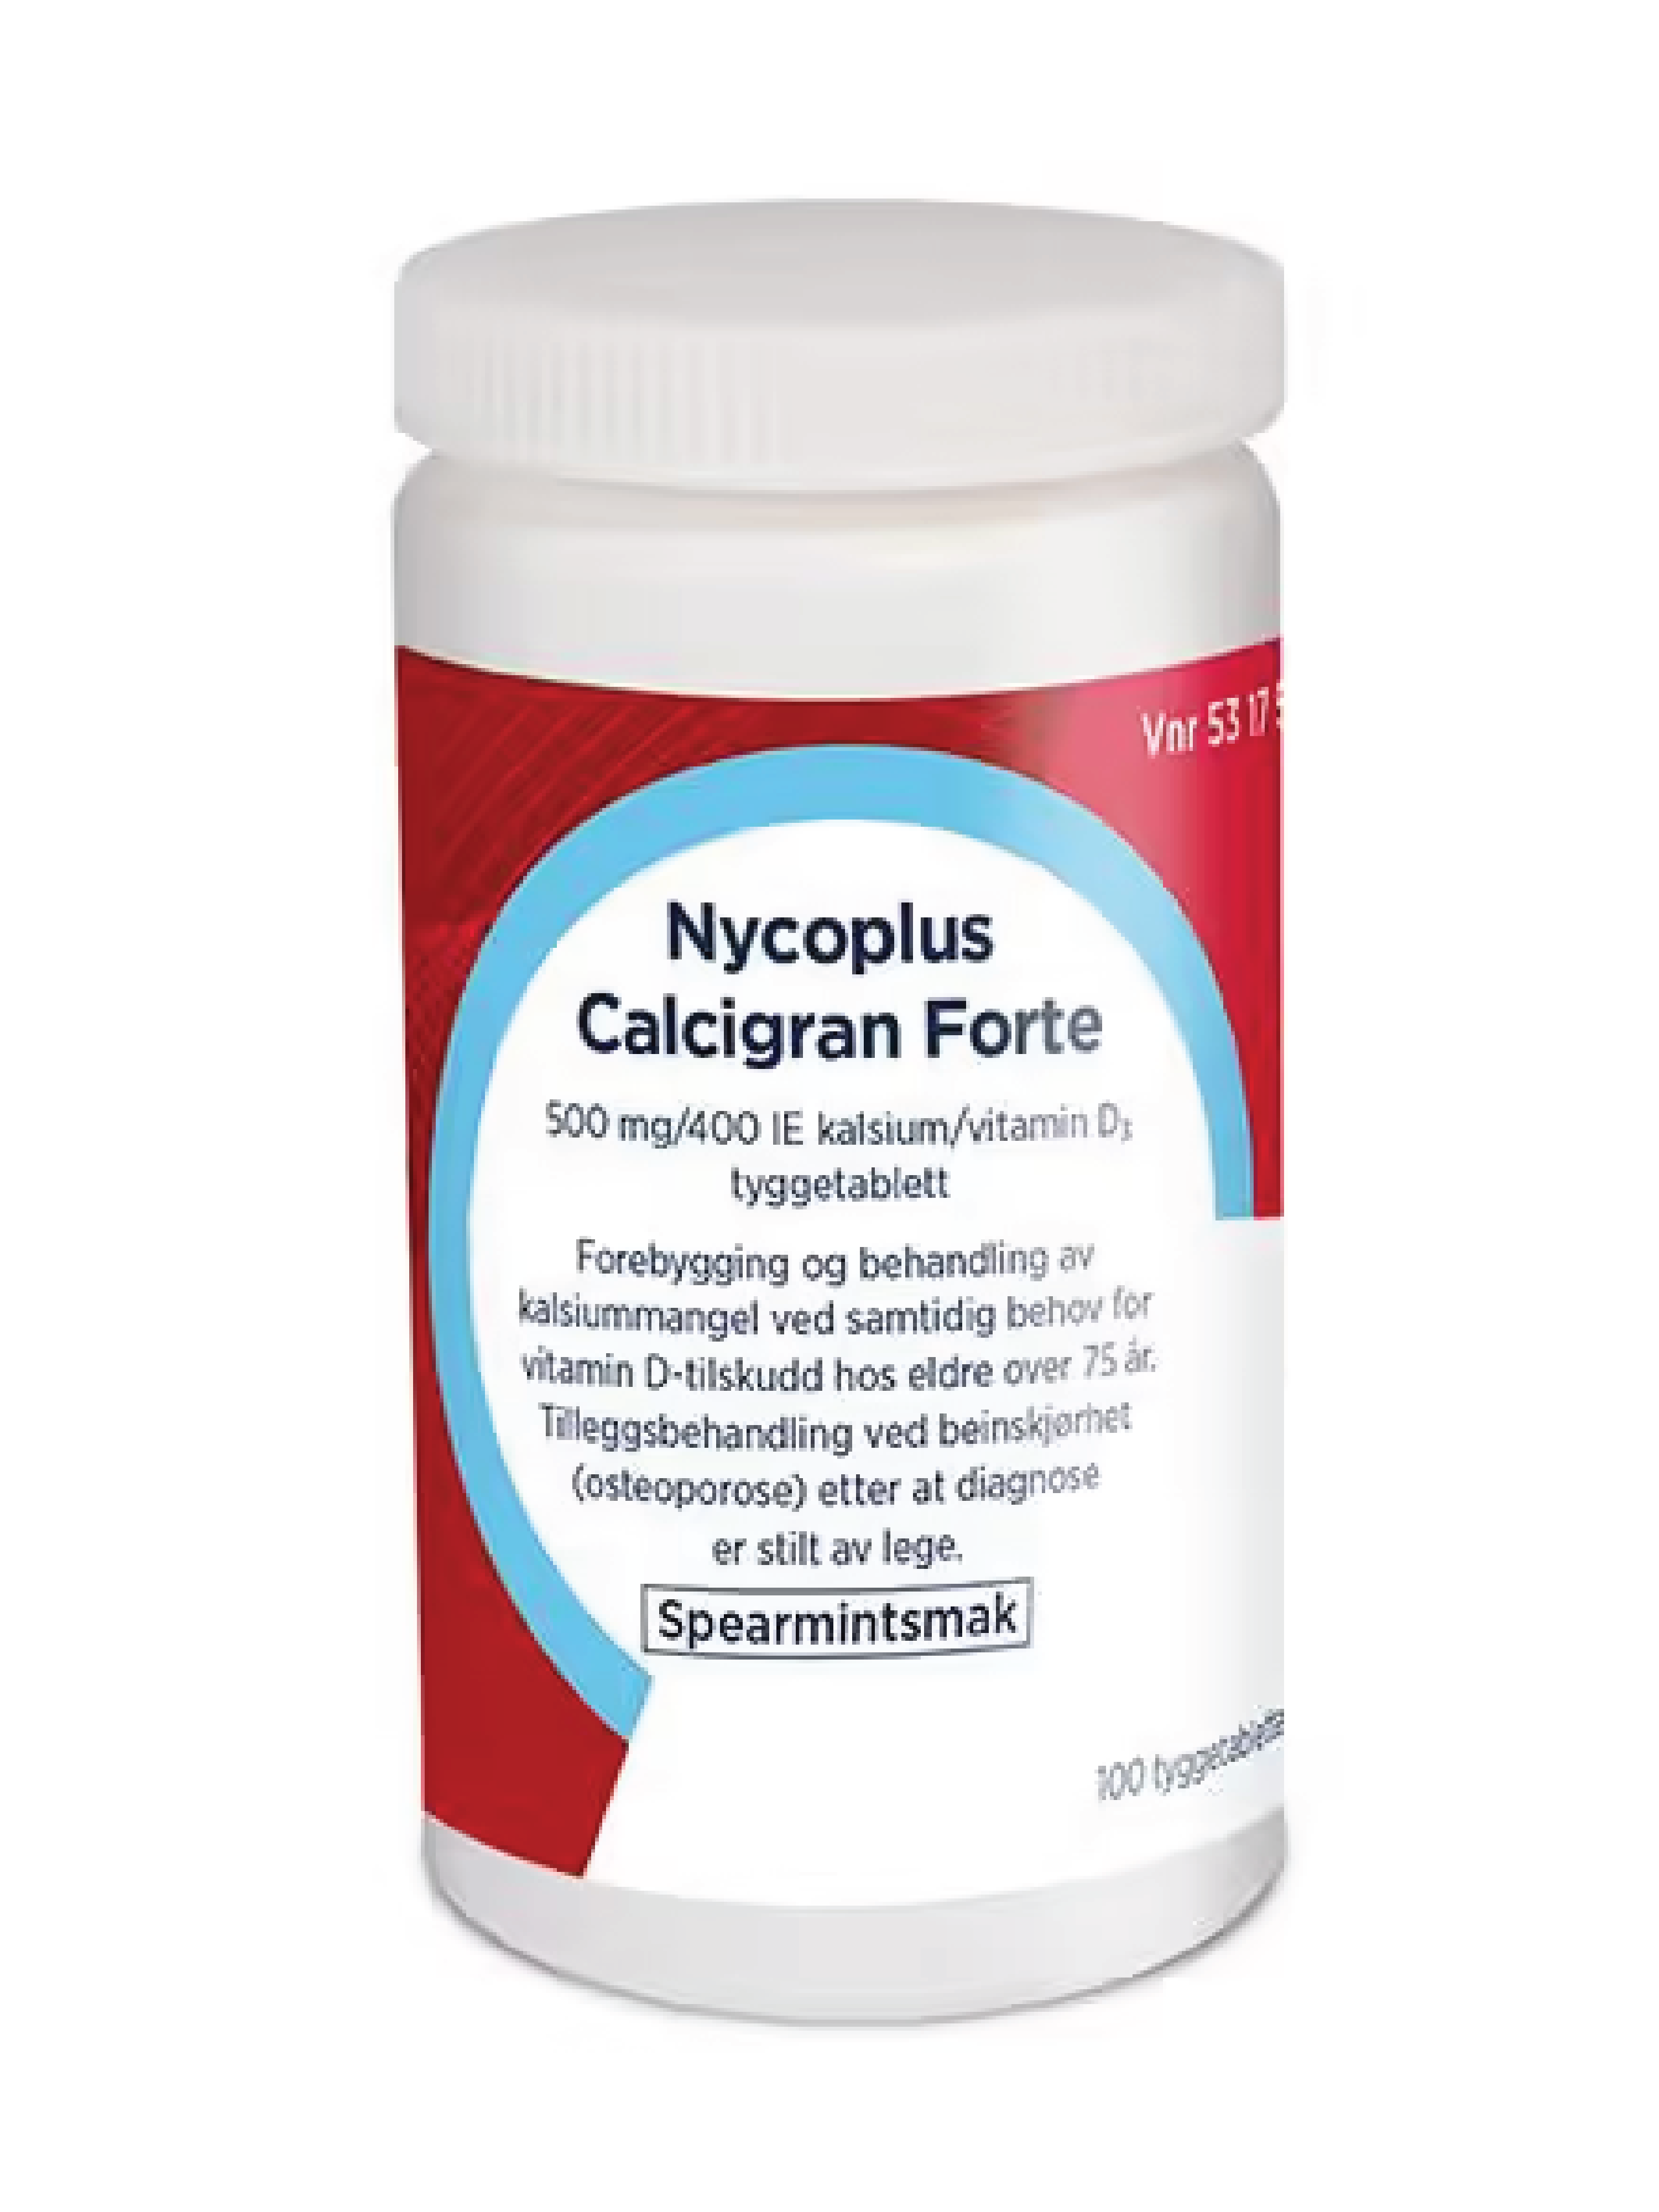 Nycoplus Calcigran Forte 500 mg/400 IE tyggetabletter, Spearmint, 100 stk.